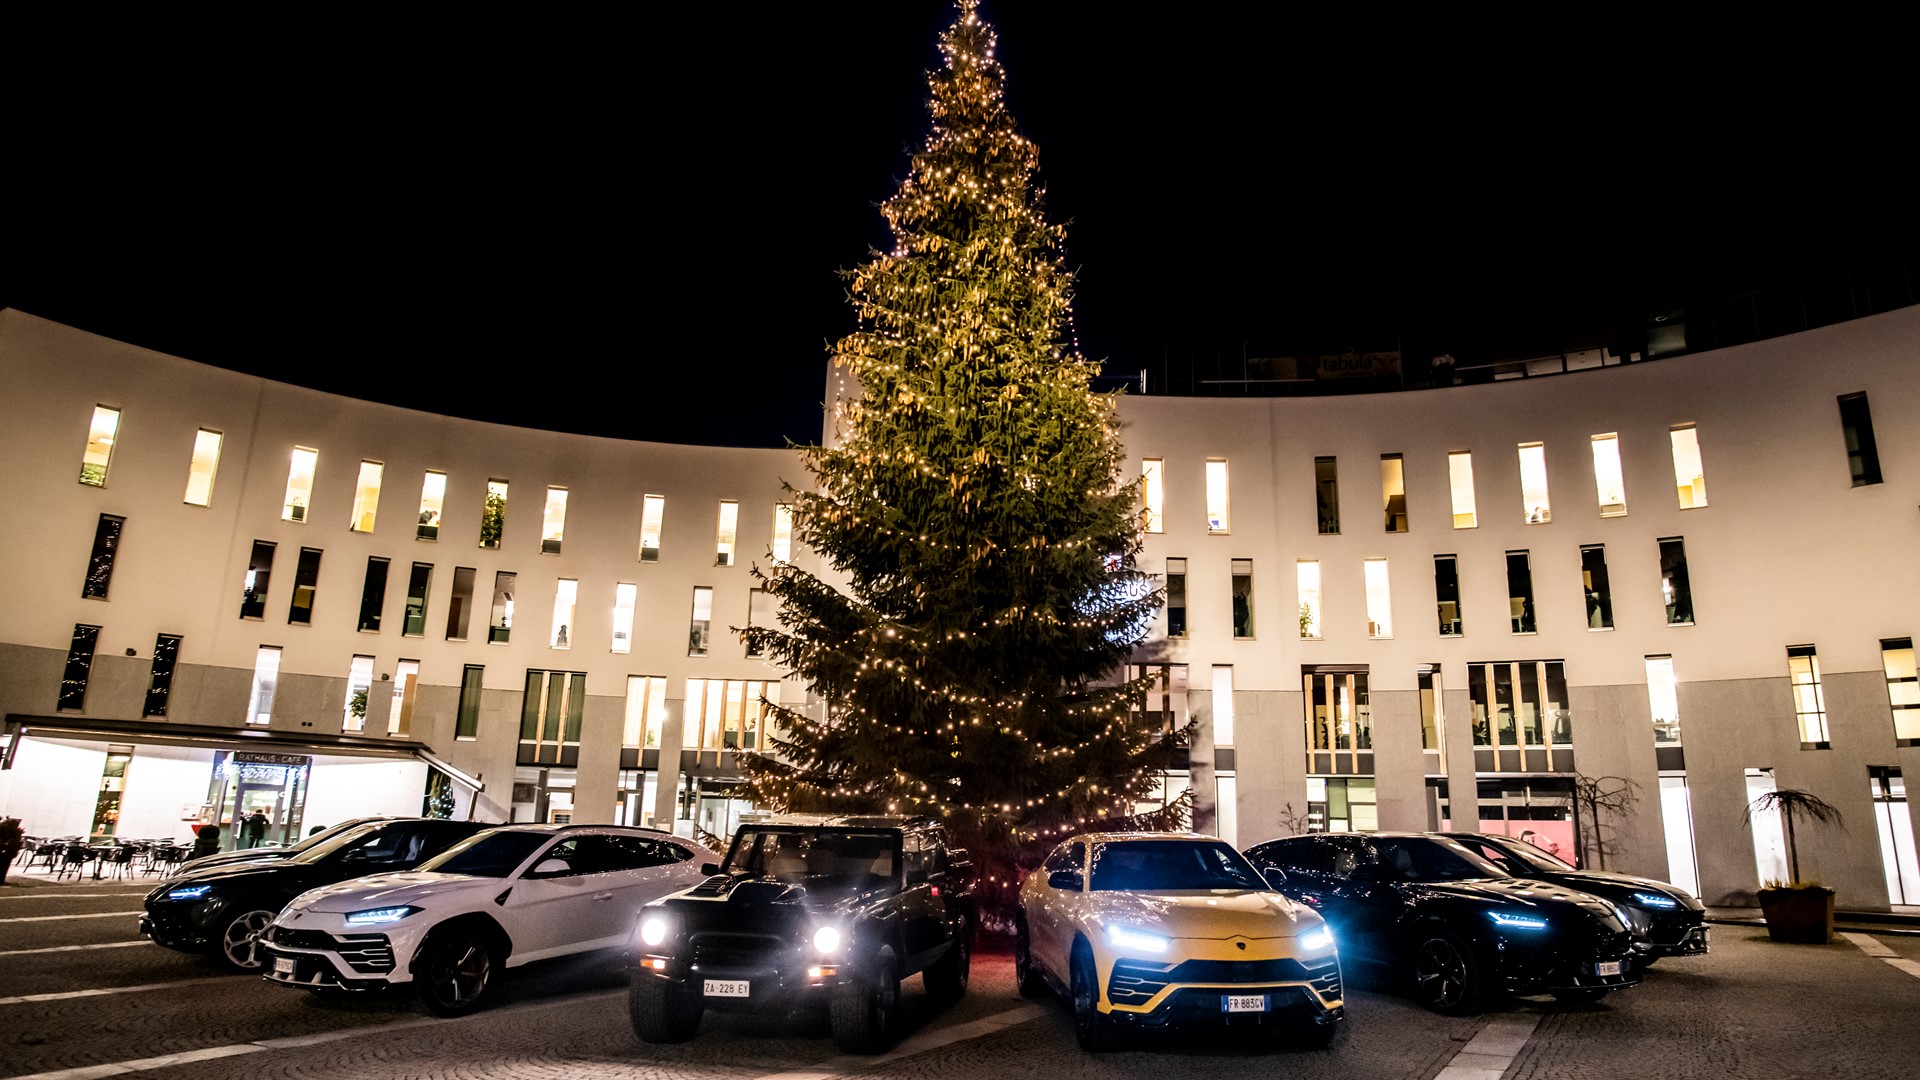 Lamborghini Christmas Drive: a festive trip for the Urus and LM visiting the Christmas market at Bruneck and celebrating a successful launch year for the Super SUV